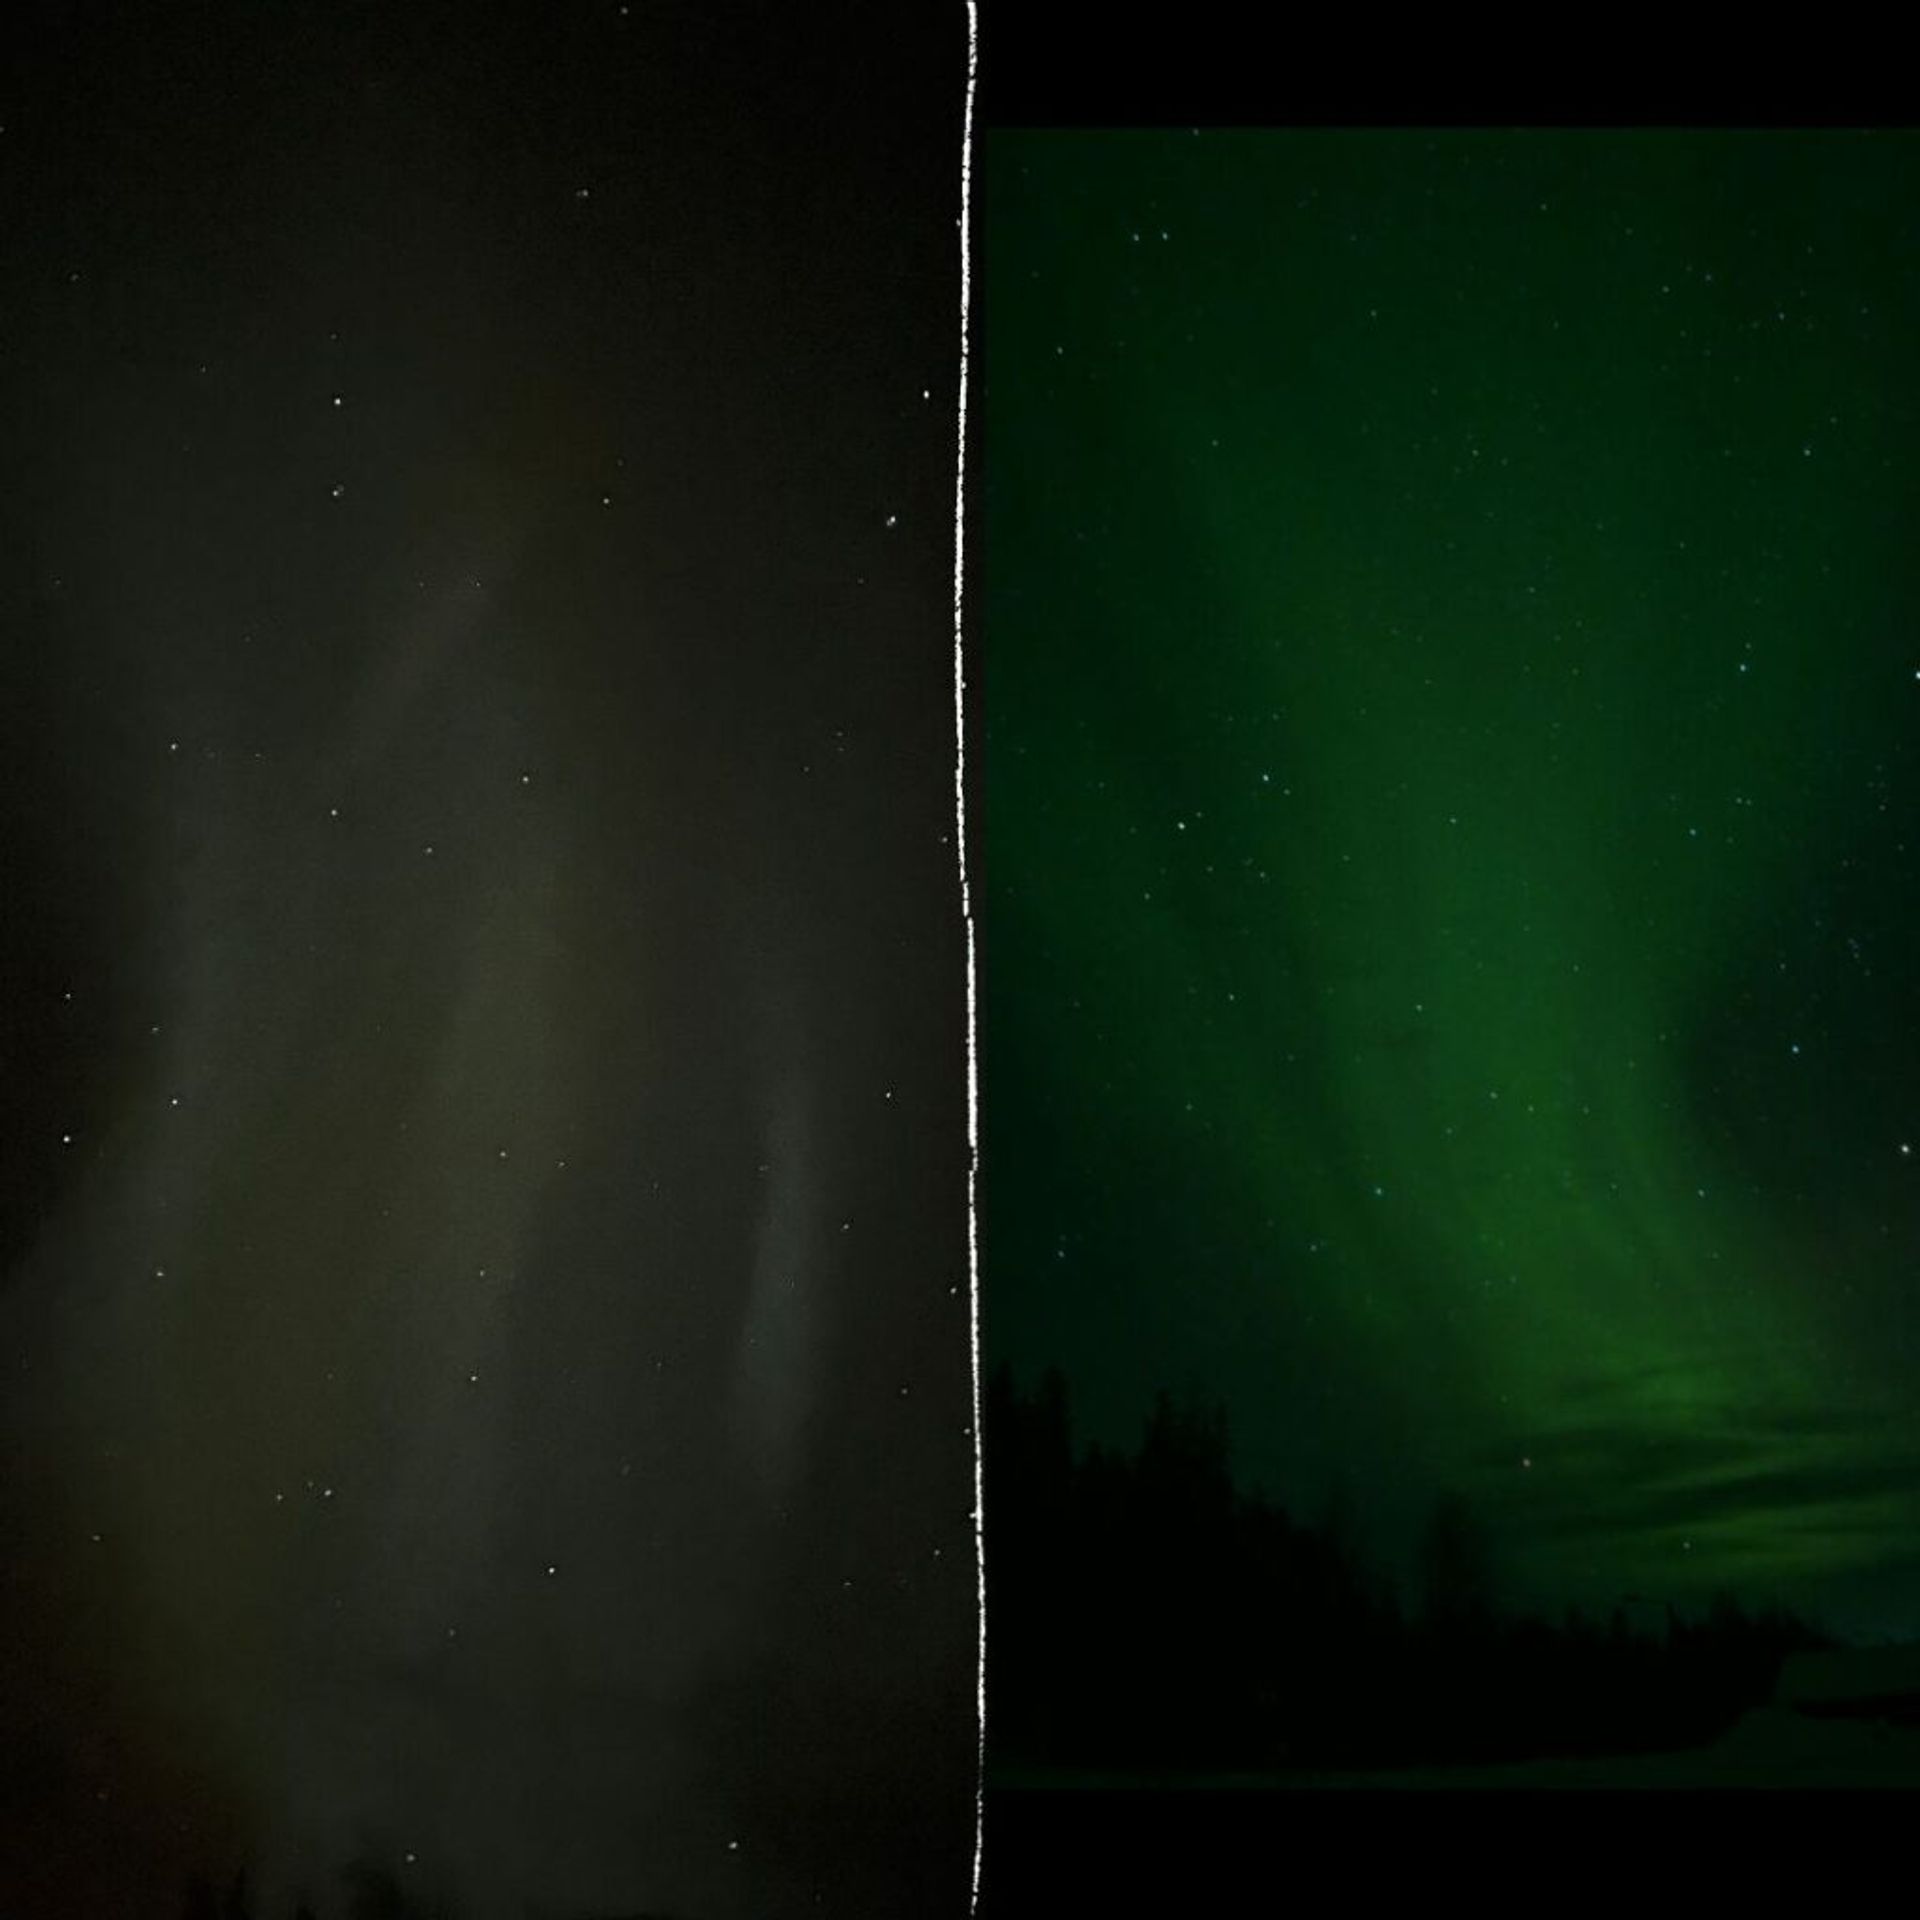 Photo of Northern lights with phone vs. camera.